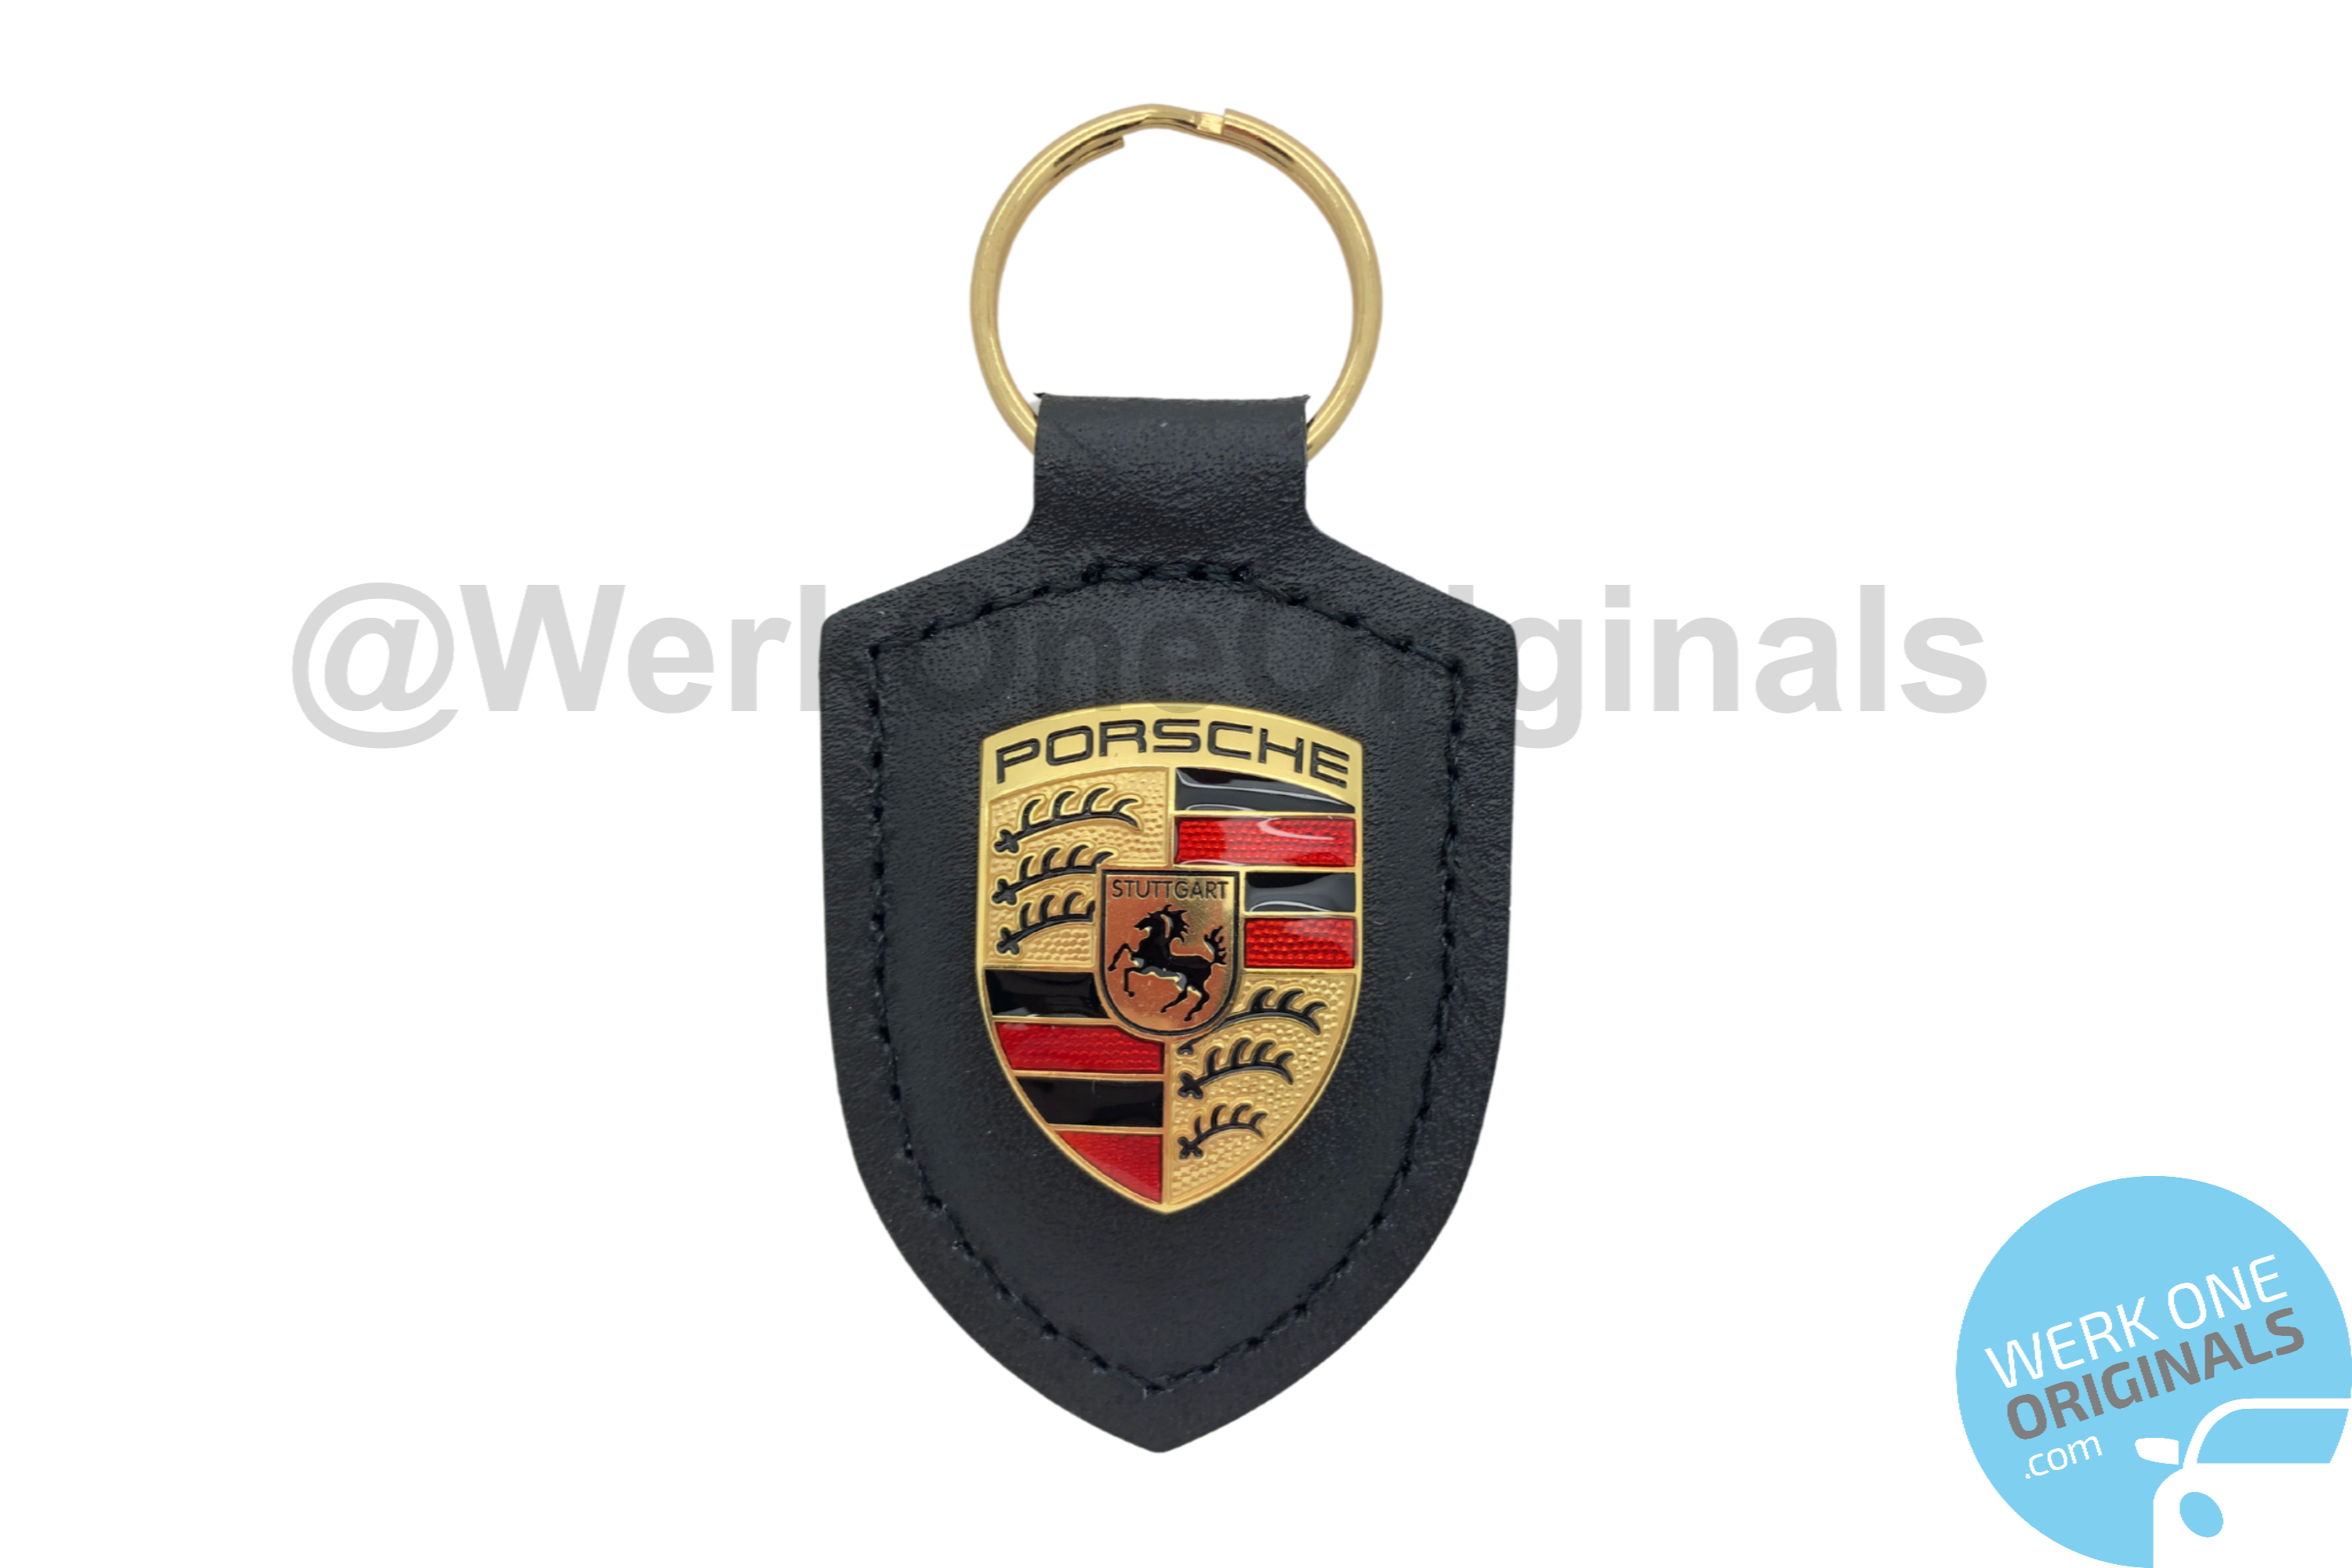 Porsche Official Crest Leather Key Fob in Black